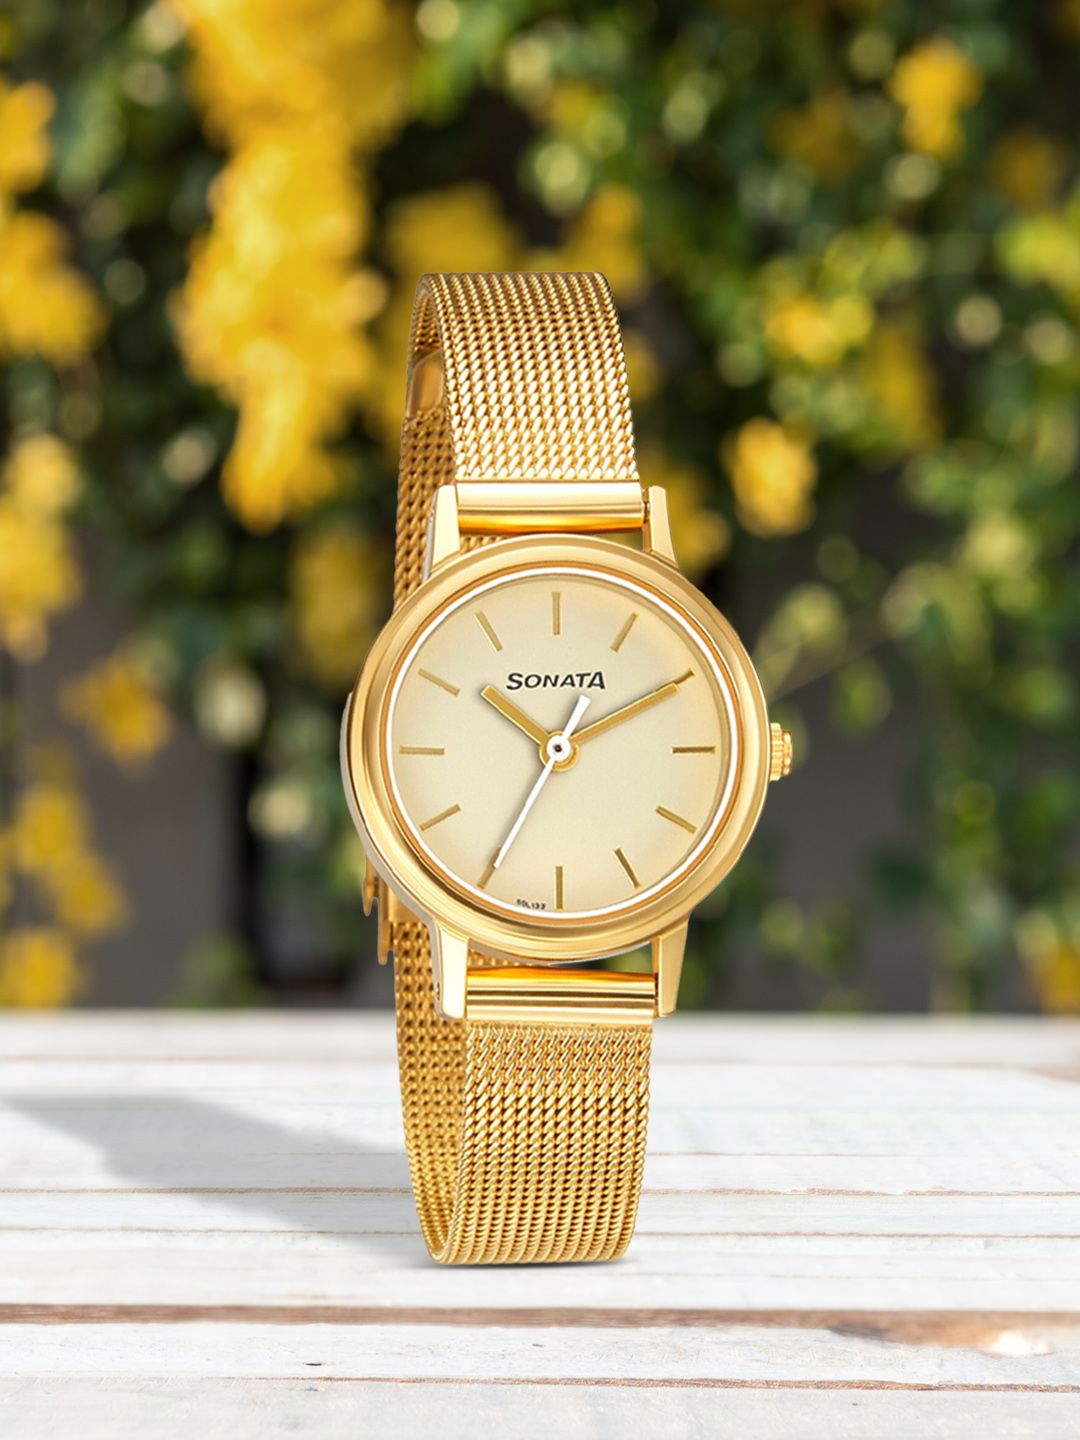 Sonata Women Gold-Toned Analogue Watch 8096YM08 Price in India